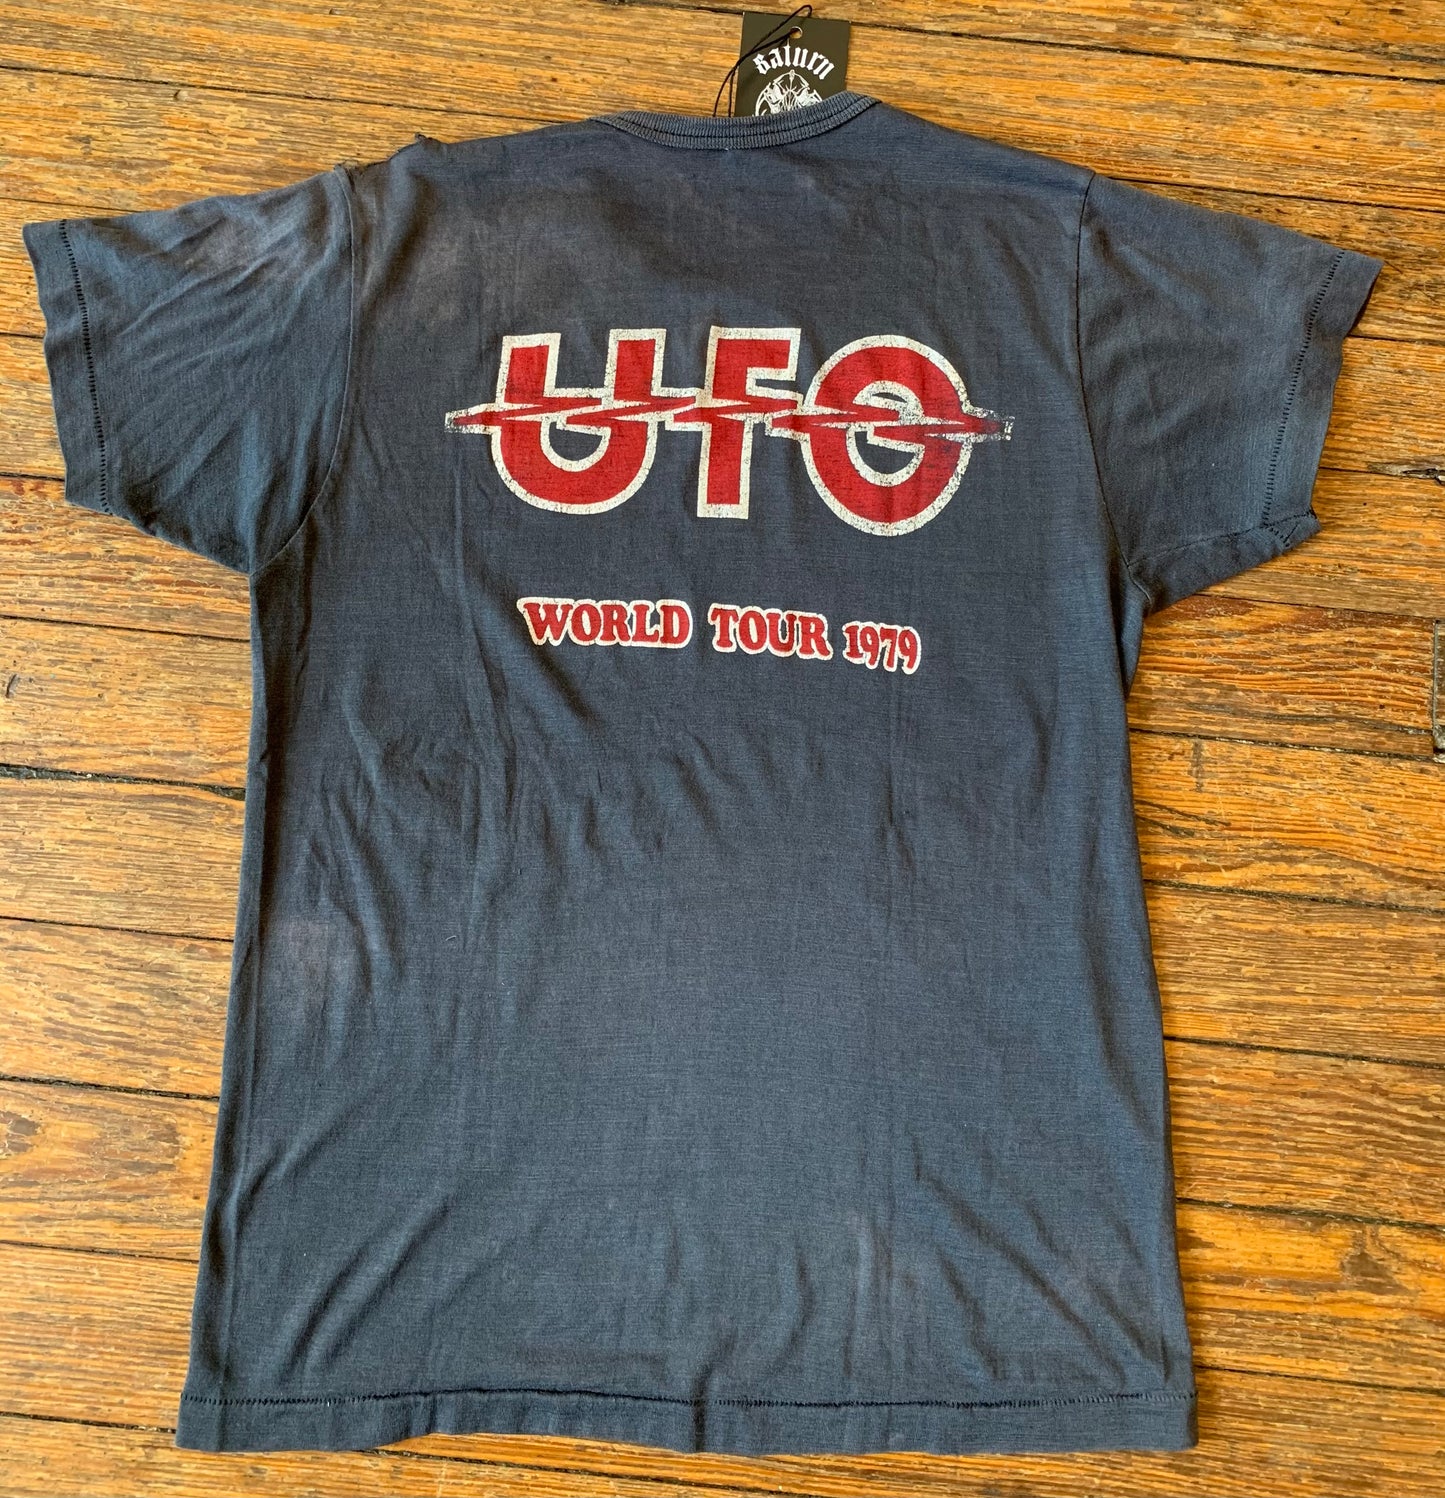 Vintage 1979 UFO “Strangers in the night” Tour Shirt